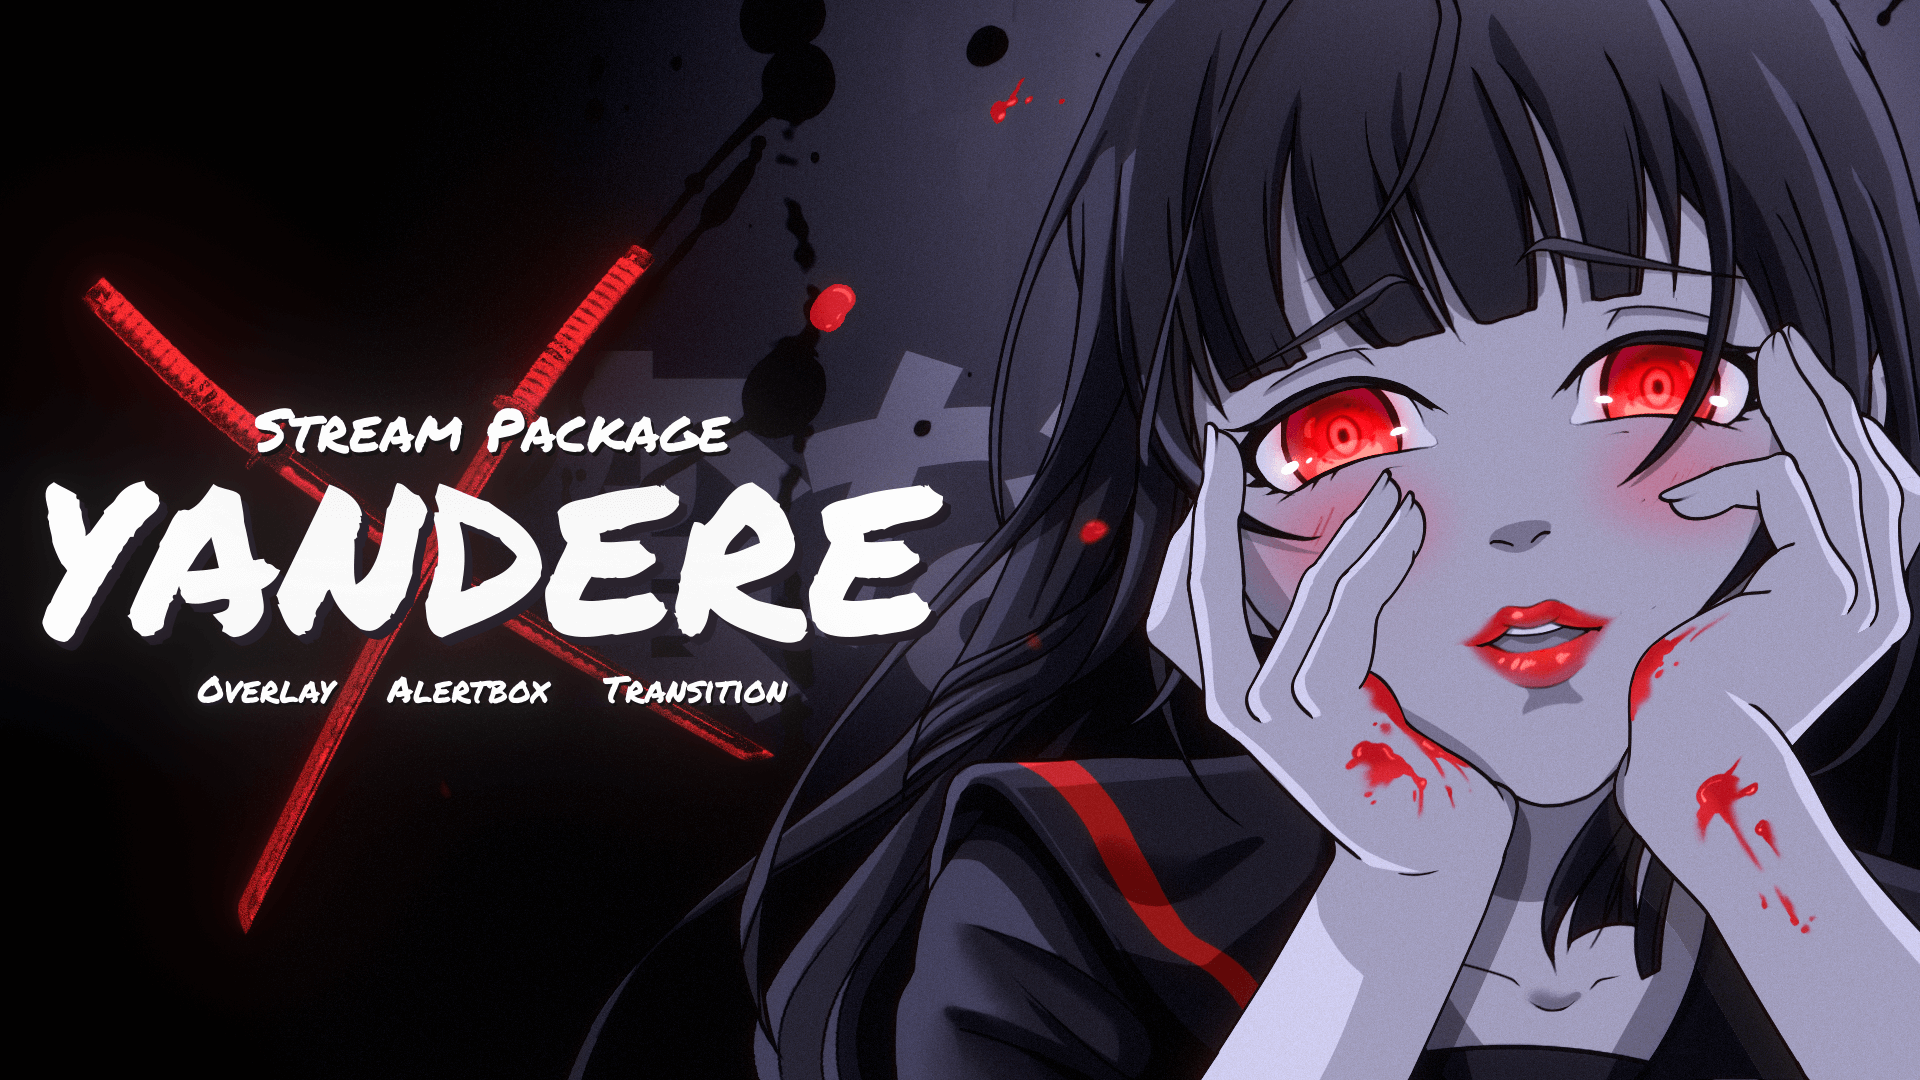 Yandere Stream Overlay & Alerts Package for Twitch and Youtube